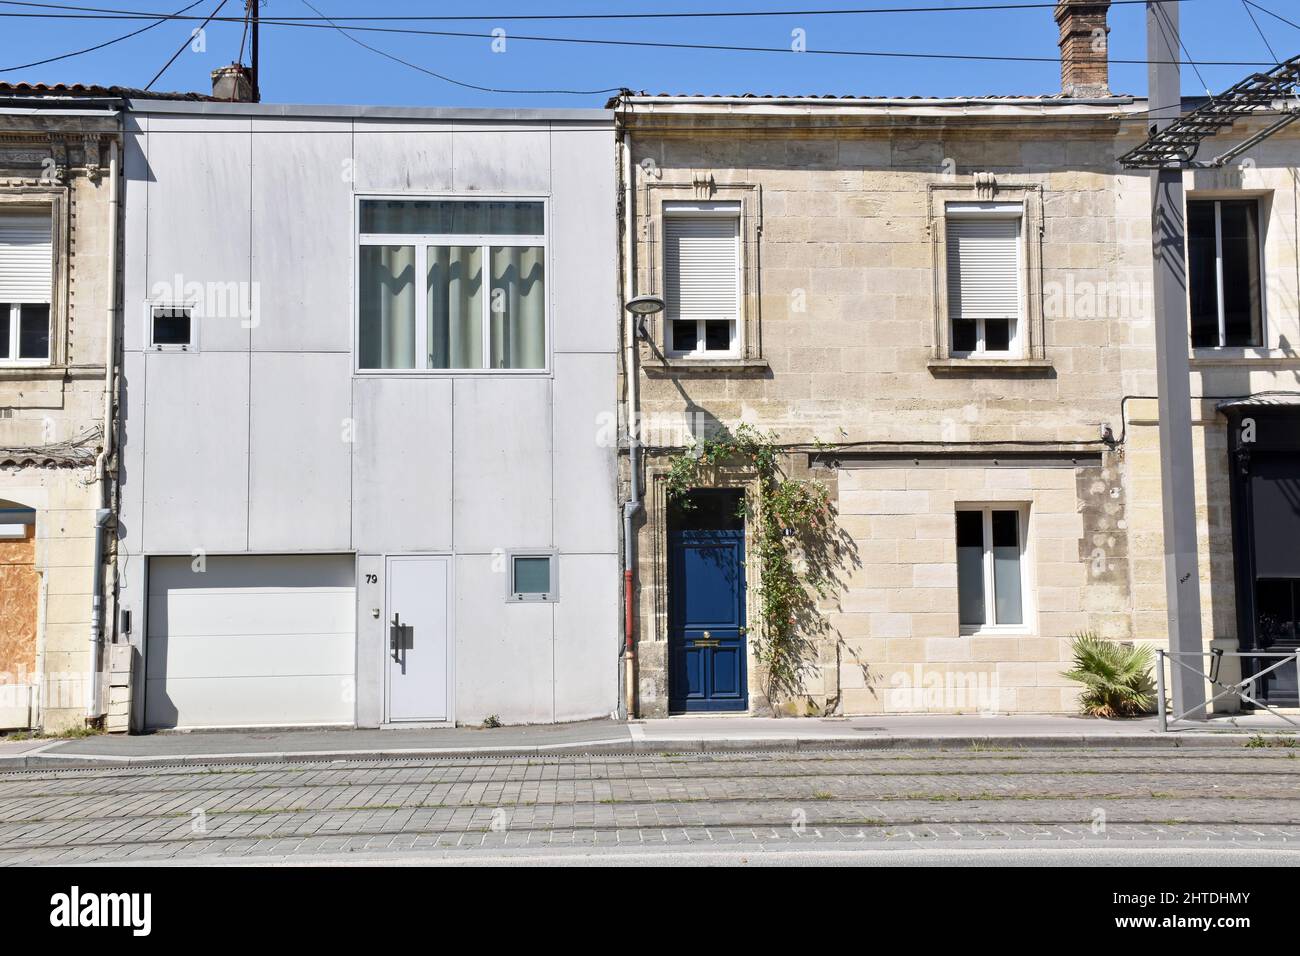 Two adjoining small houses, one in its original state, the other unsympathetically replaced or rebuilt. How not to do redevelopment, Bordeaux, France Stock Photo